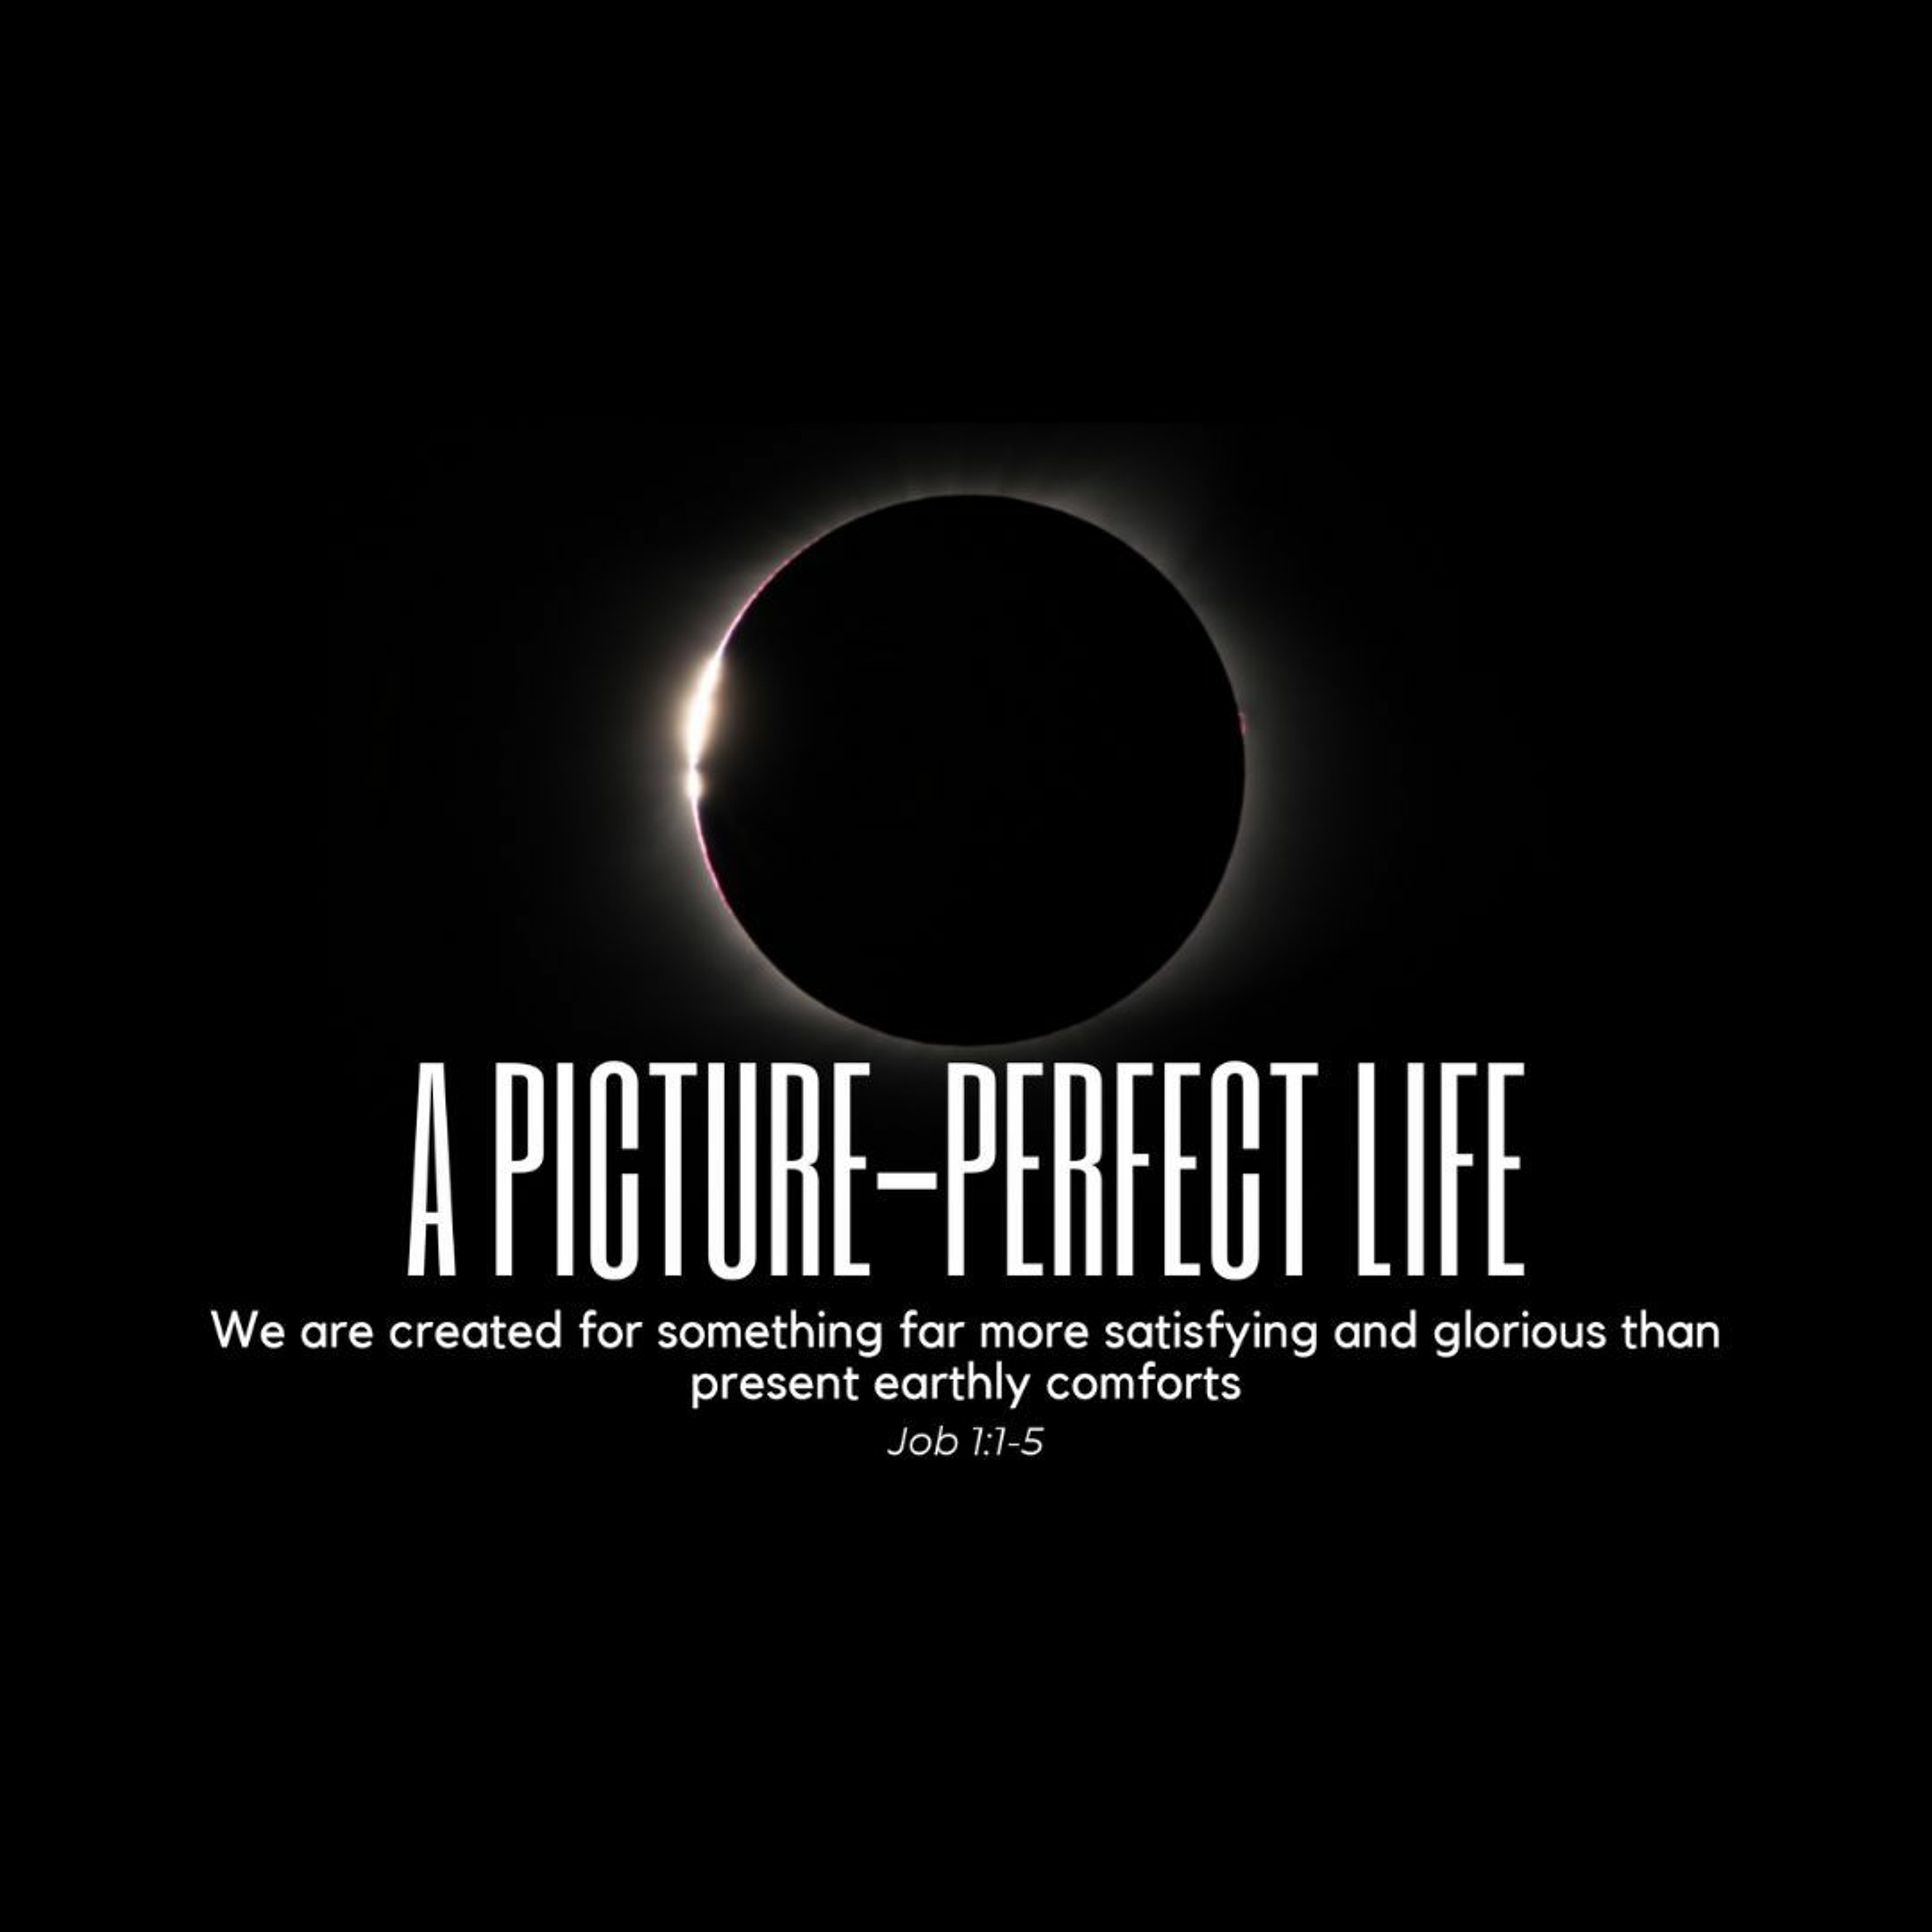 A Picture-Perfect Life (Job 1:1-5)